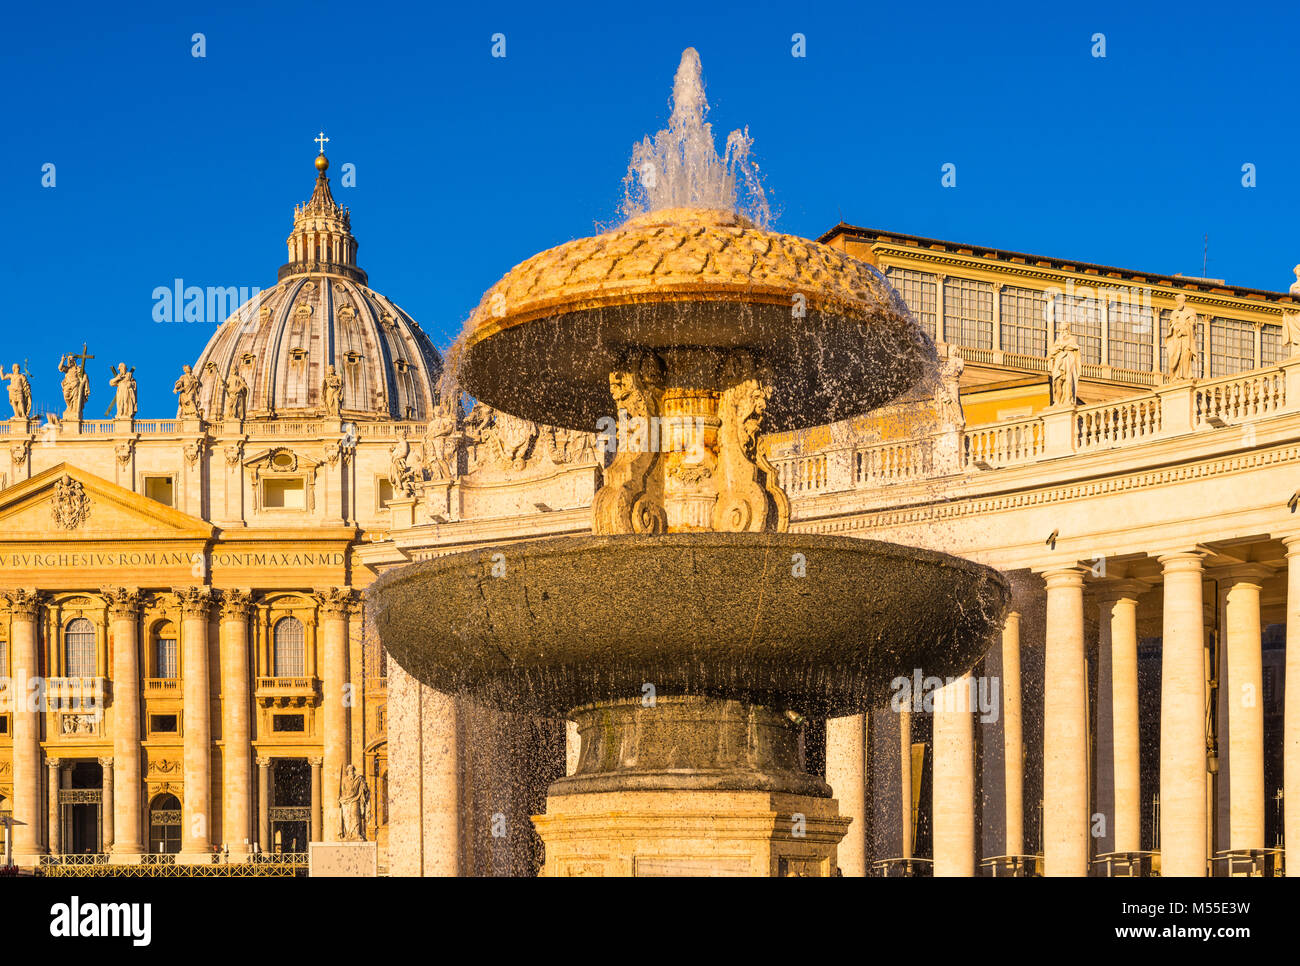 Bernini's fountains at St. Peter's square in early morning light, Vatican City, Rome, Italy. Stock Photo